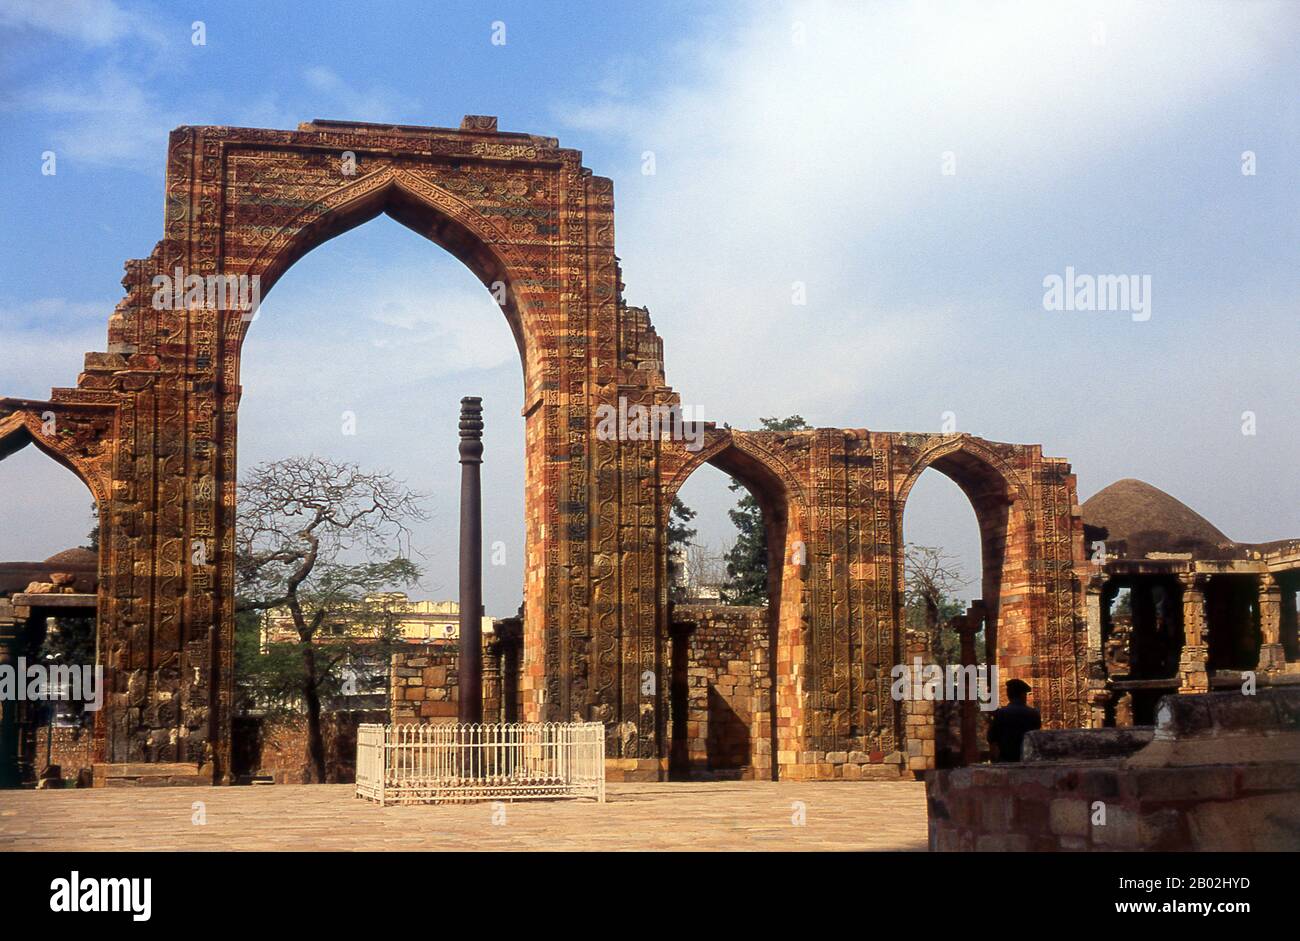 The Quwwat-ul-Islam mosque was built by Qutb-ud-din Aibak, founder of the Mamluk or Slave dynasty. Construction began in 1193 CE. It was the first mosque built in Delhi after the Islamic conquest of India.  Construction of the Qutb Minar was started in 1192 by Qutb-ud-din Aibak, the first Sultan of Delhi, and was carried on by his successor, Iltutmish. In 1368, Firoz Shah Tughlaq constructed the fifth and the last storey.  Delhi is said to be the site of Indraprashta, capital of the Pandavas of the Indian epic Mahabharata. Excavations have unearthed shards of painted pottery dating from around Stock Photo